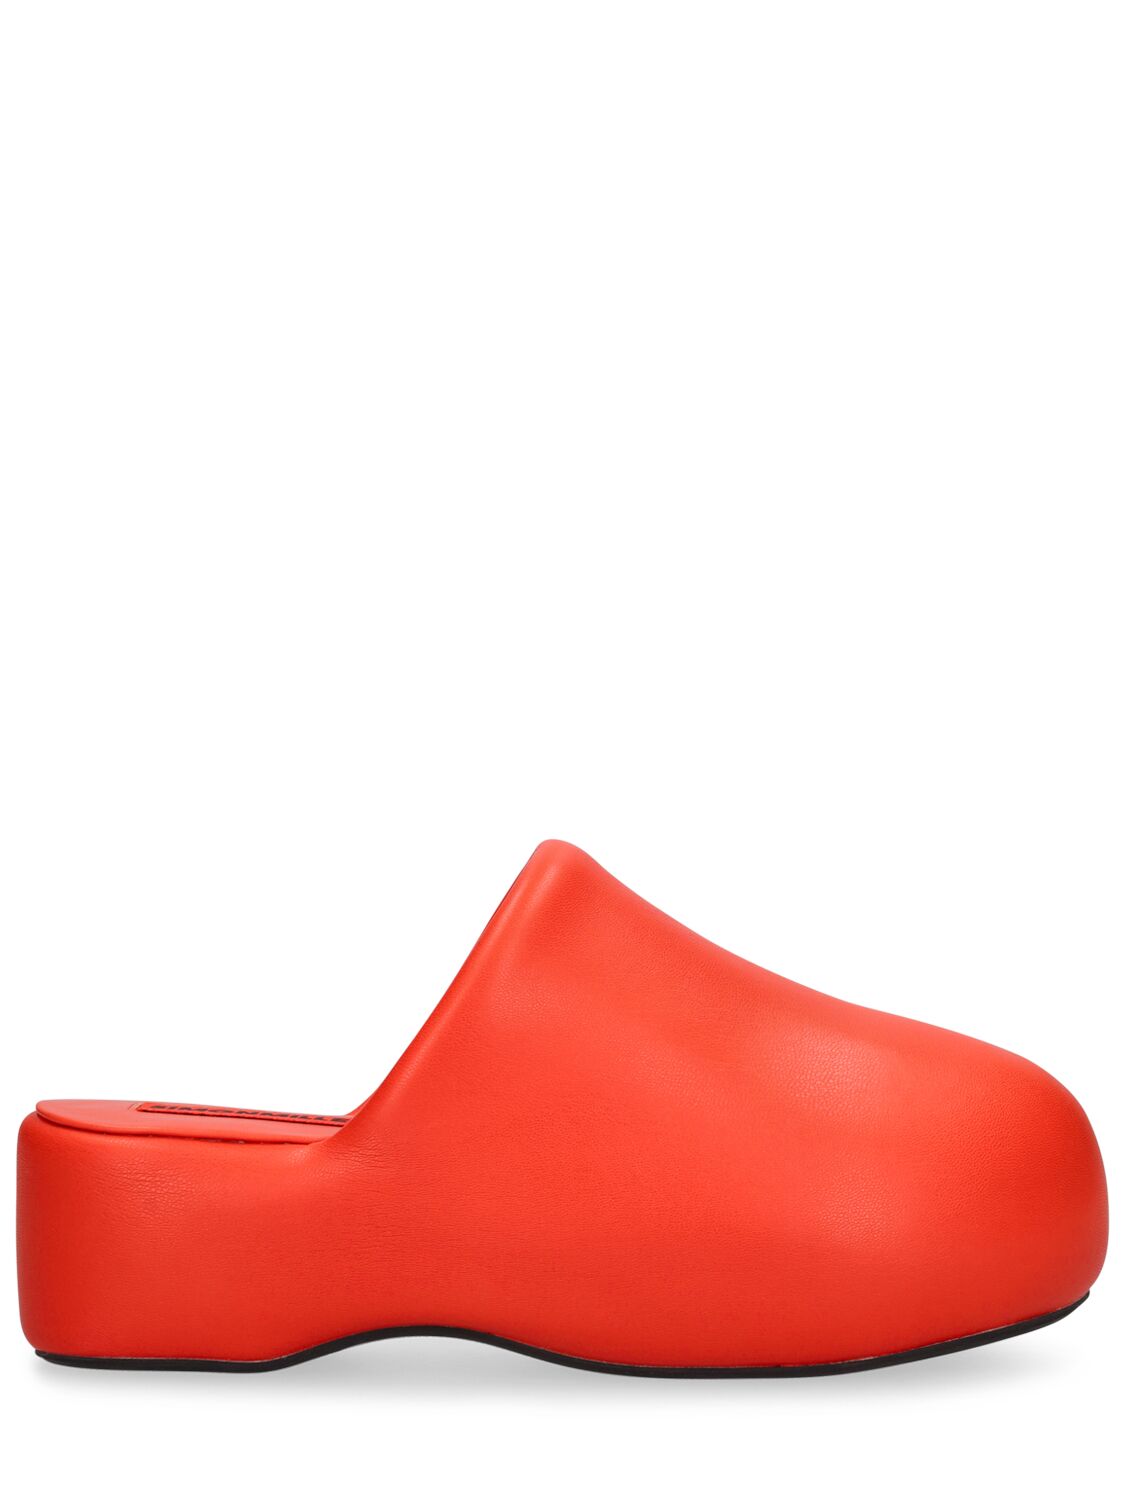 Image of 55mm Bubble Faux Leather Clogs